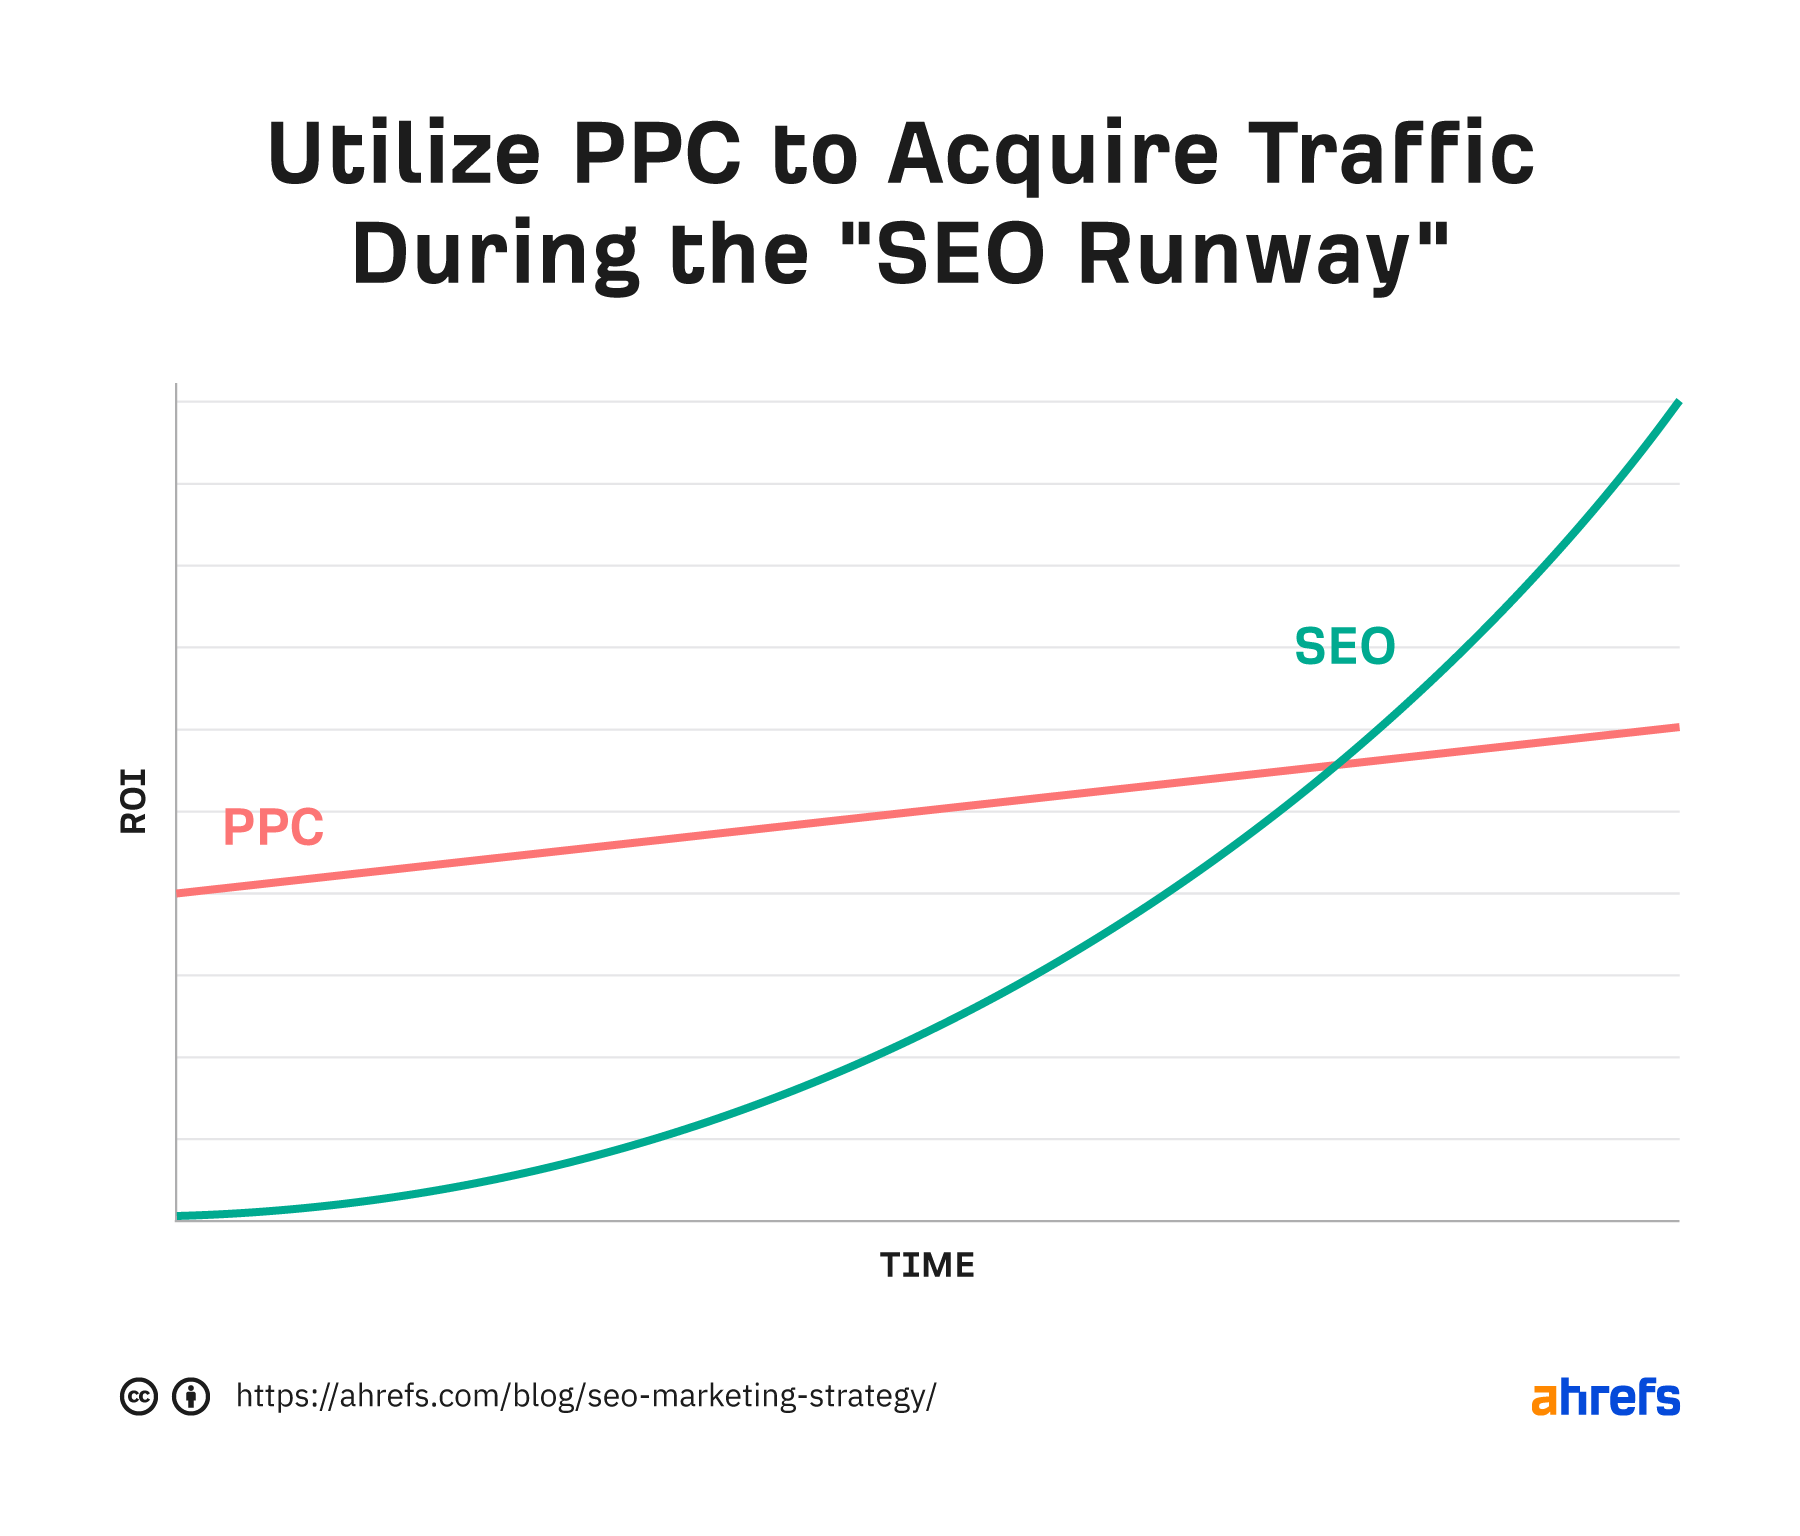 Chart showing PPC vs. SEO ROI over time